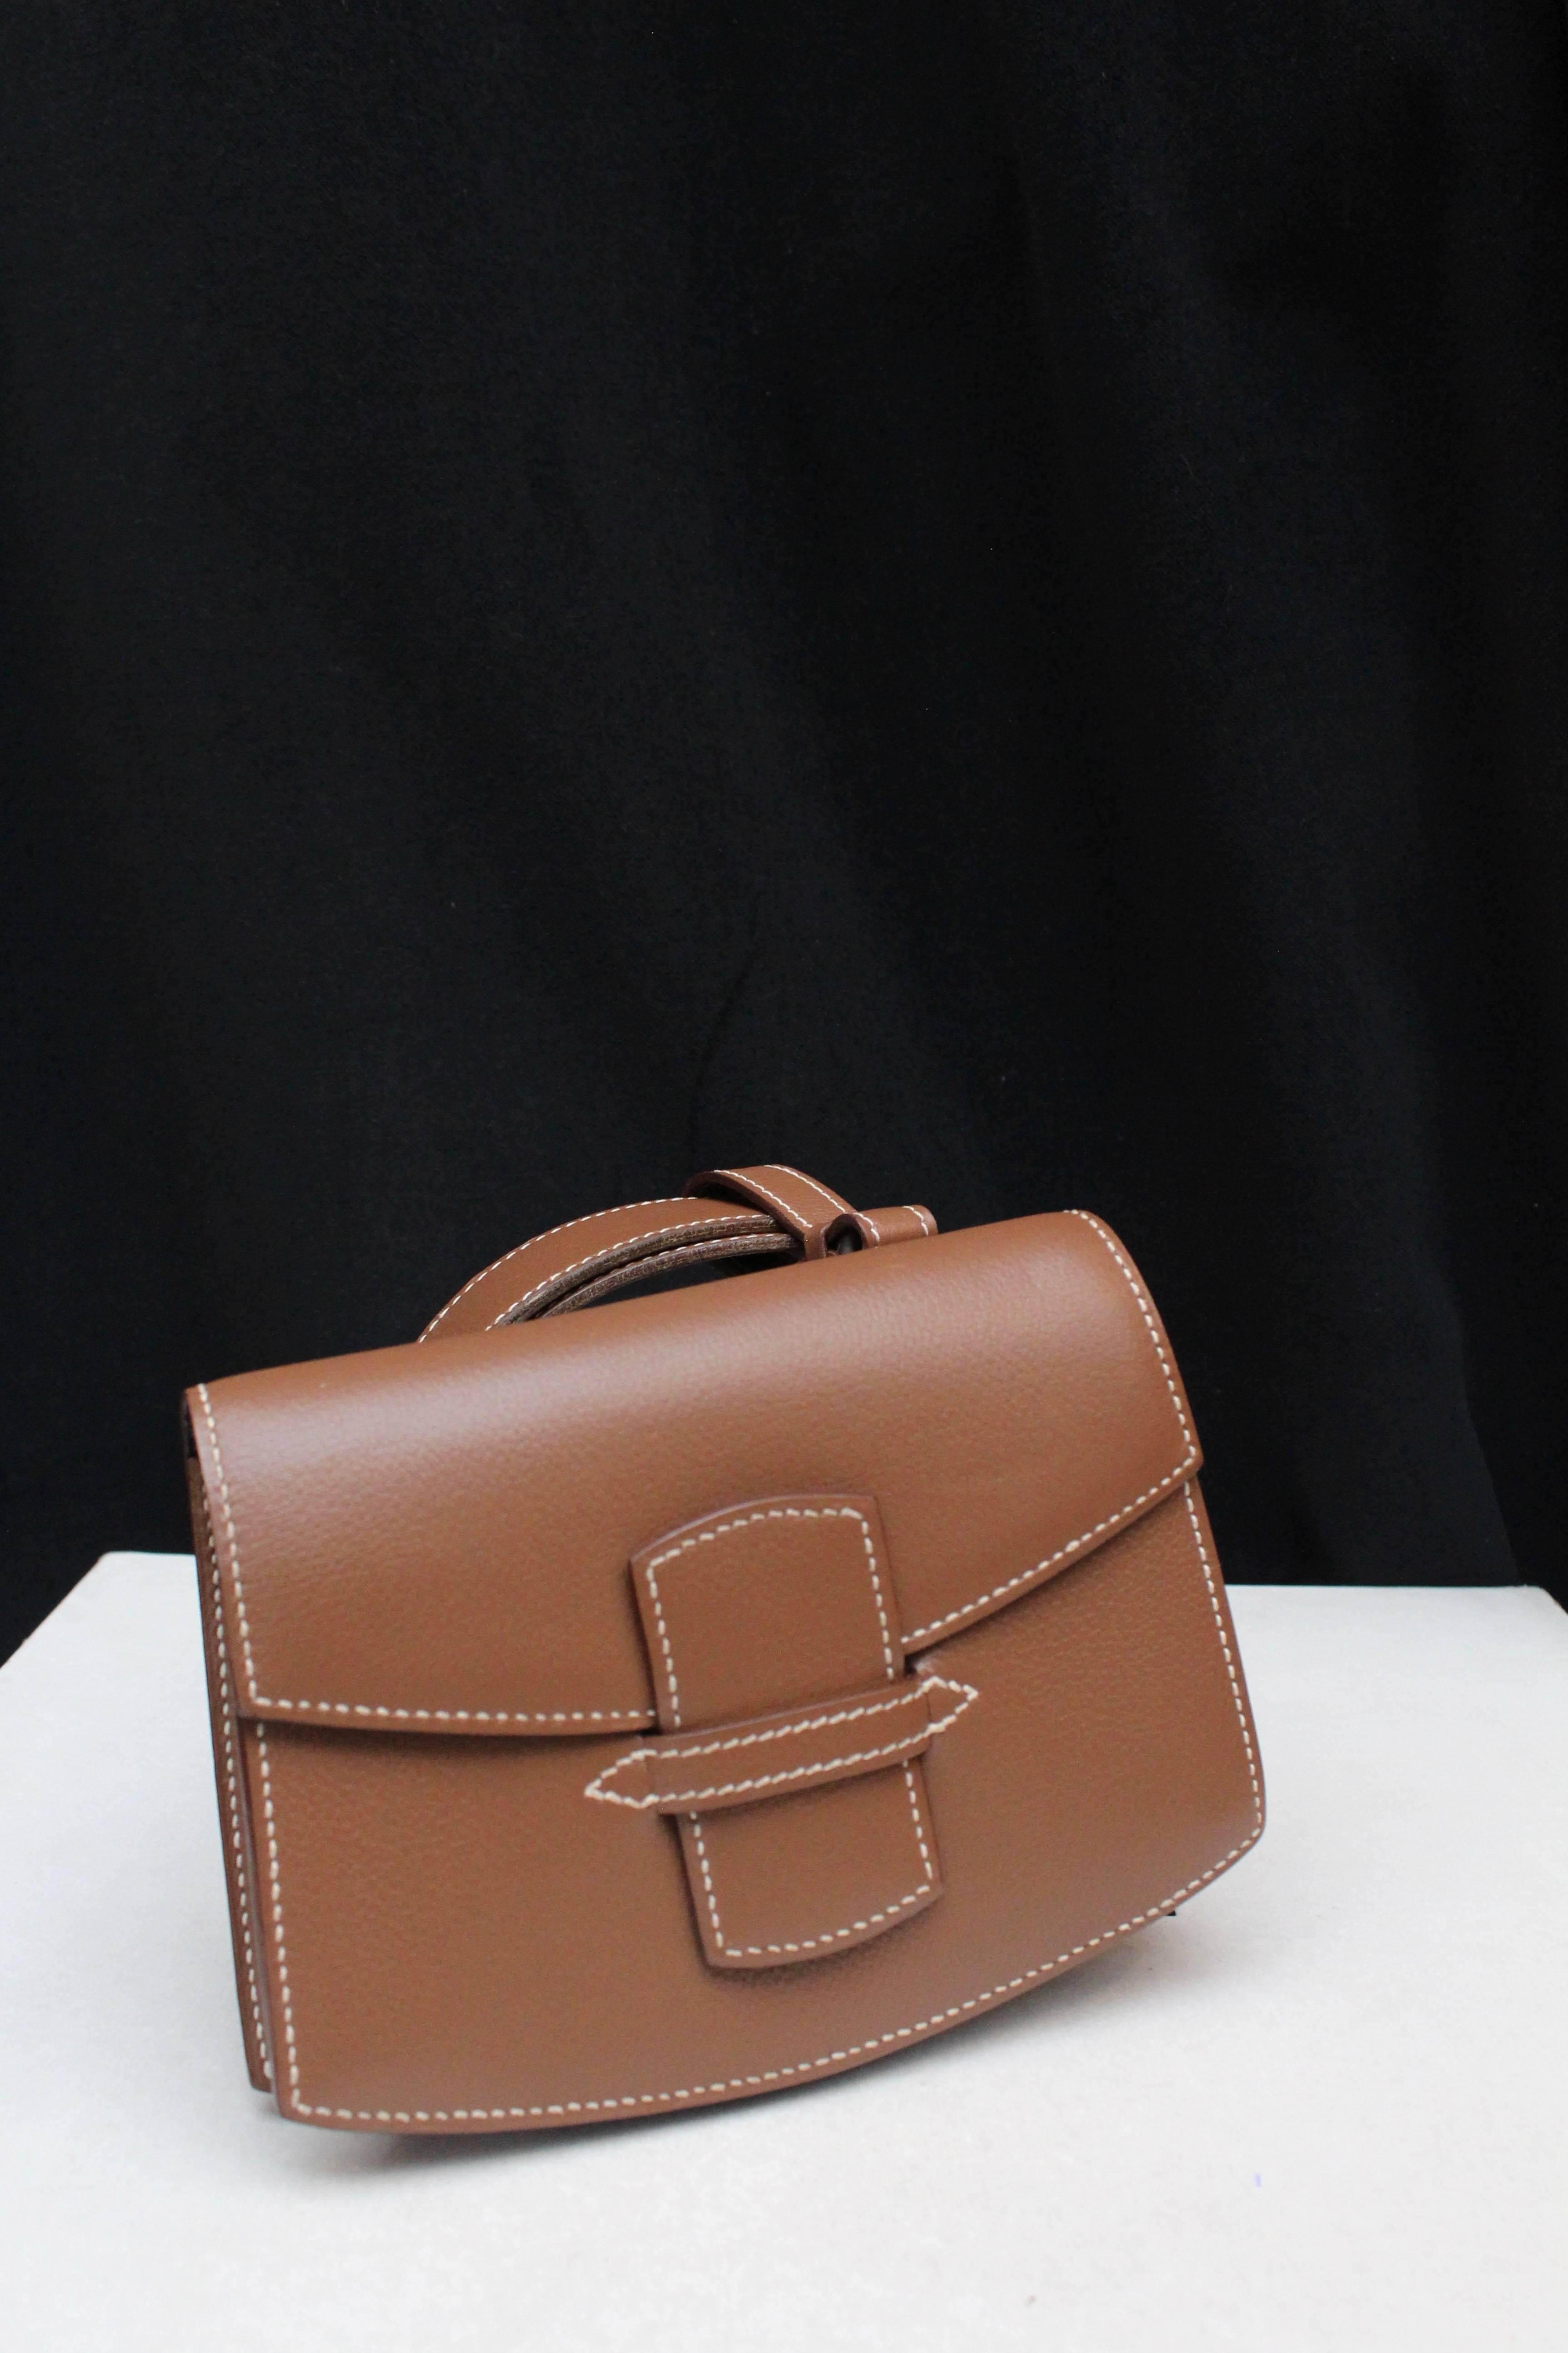 HERMES PARIS (Made in France) Very nice clutch/belt made of grained brown leather with white over stitching, comprised of a thin belt and a clutch with loops.

Belt size 70. Clutch height 12.5 cm (5 in); Width 15.5 cm (6 in).

Mint condition.

 